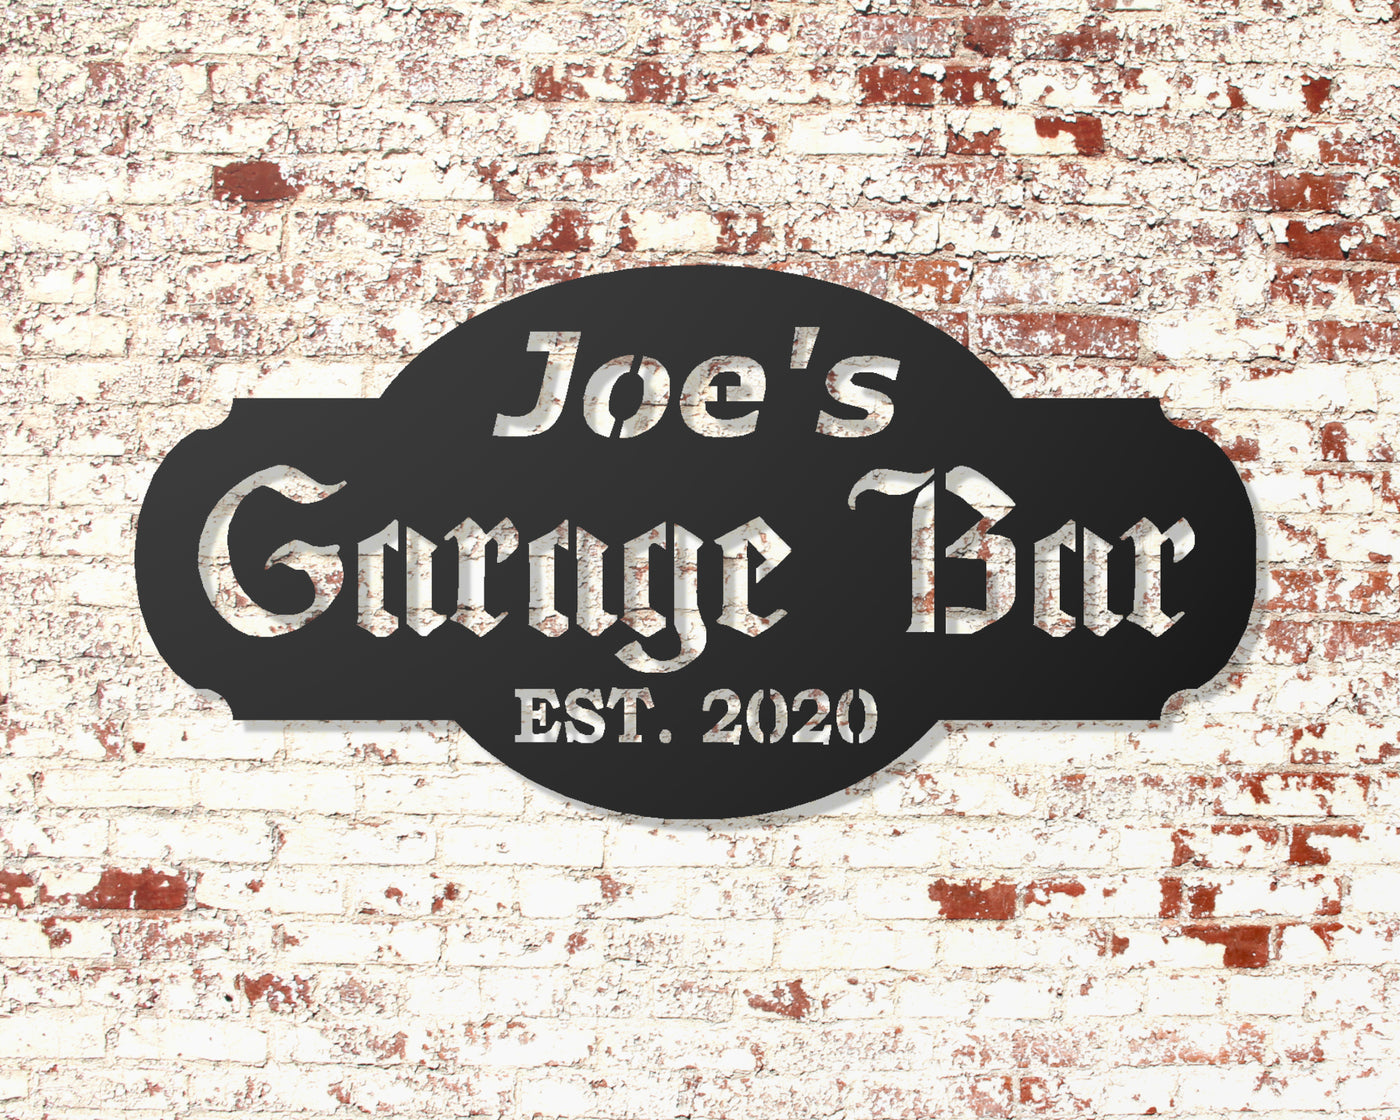 Personalized Garage Bar Metal Sign with Name and EST. Date - Madison Iron and Wood - Personalized sign - metal outdoor decor - Steel deocrations - american made products - veteran owned business products - fencing decorations - fencing supplies - custom wall decorations - personalized wall signs - steel - decorative post caps - steel post caps - metal post caps - brackets - structural brackets - home improvement - easter - easter decorations - easter gift - easter yard decor